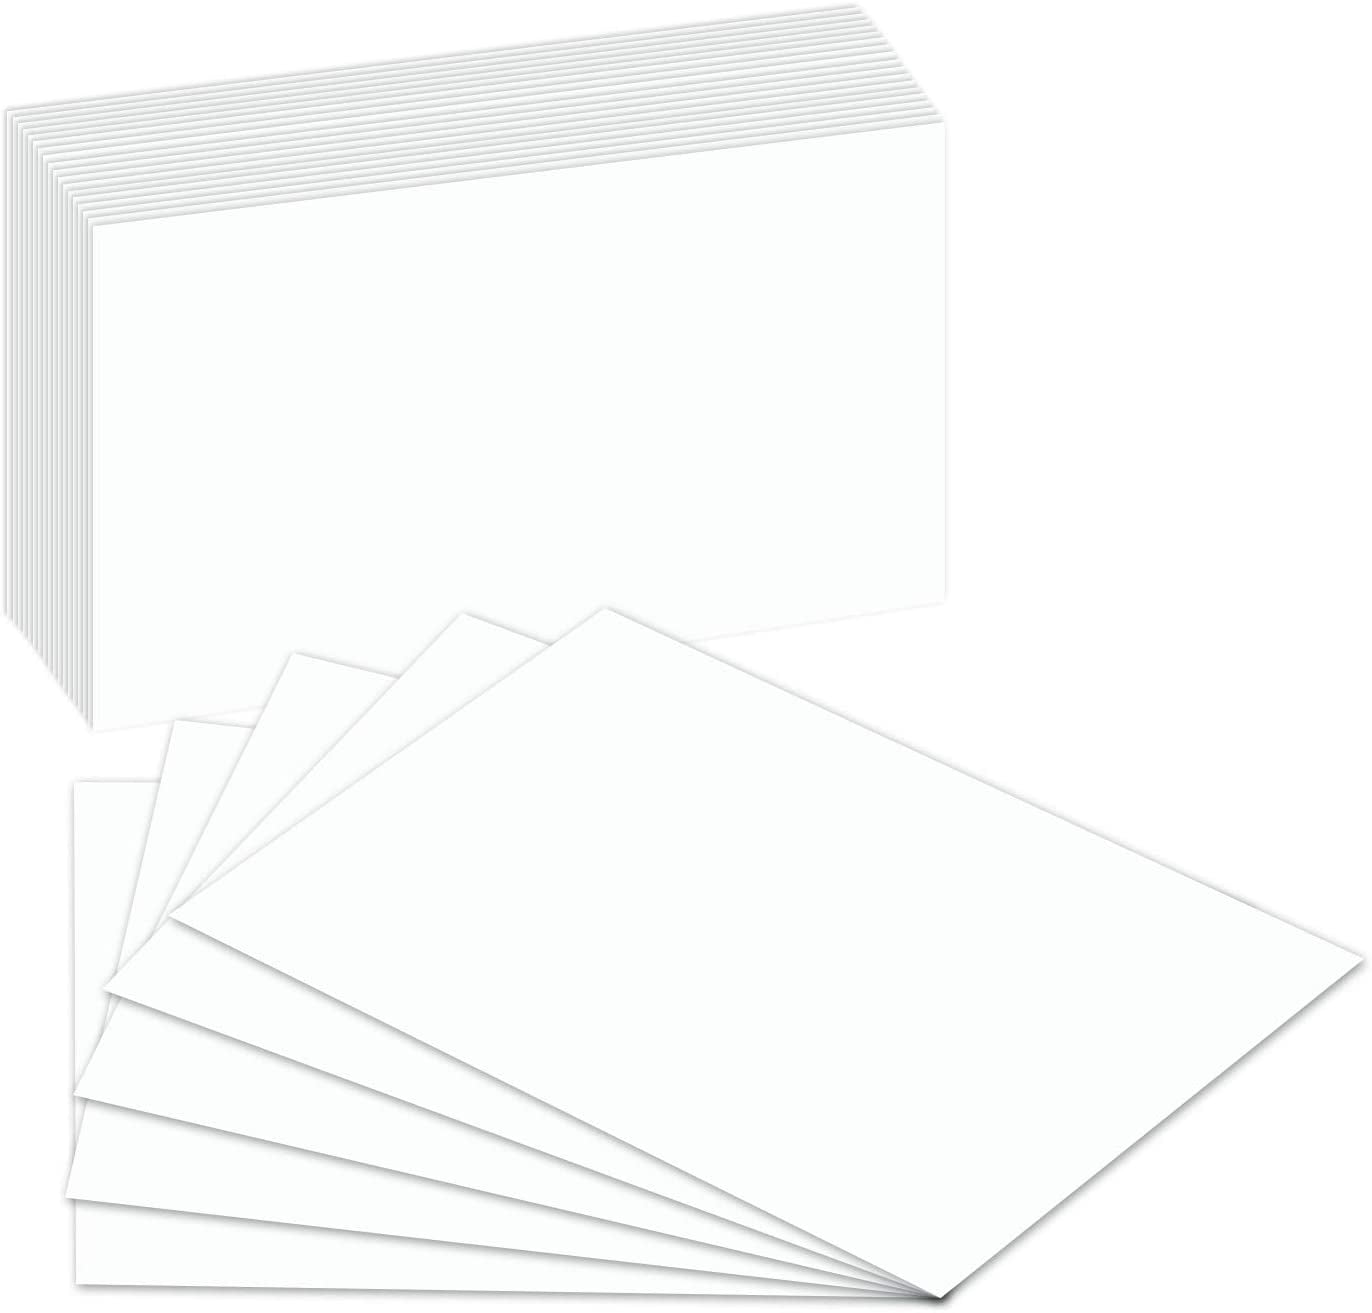 4x6 Blank Index Cards from School Specialty